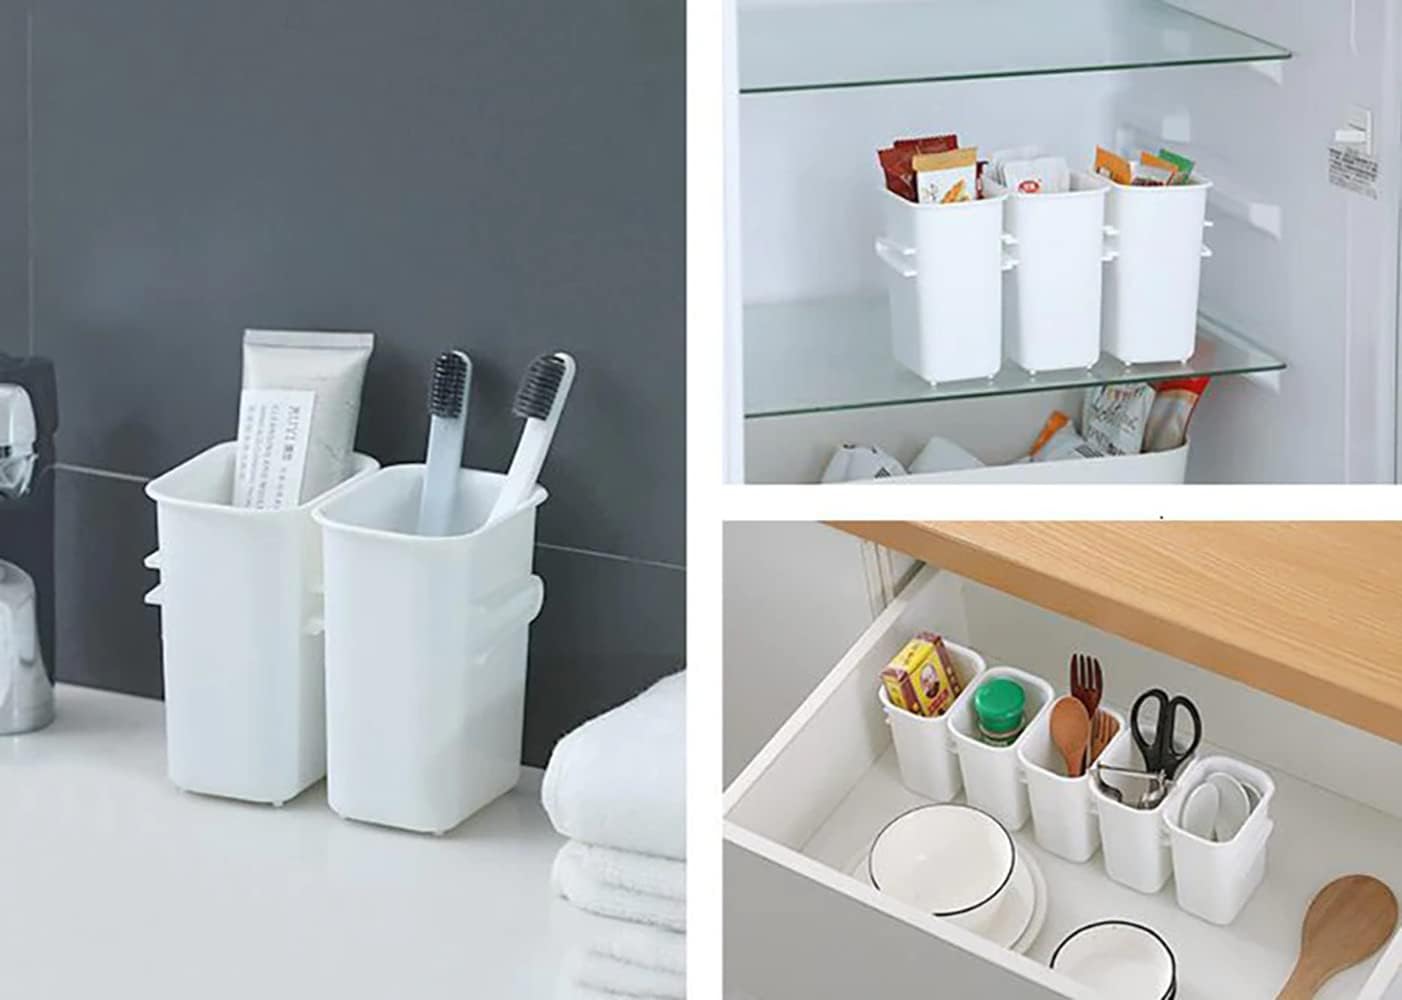 Refrigerator food storage boxes Multi-purpose containers for the kitchen and bathroom for home organization